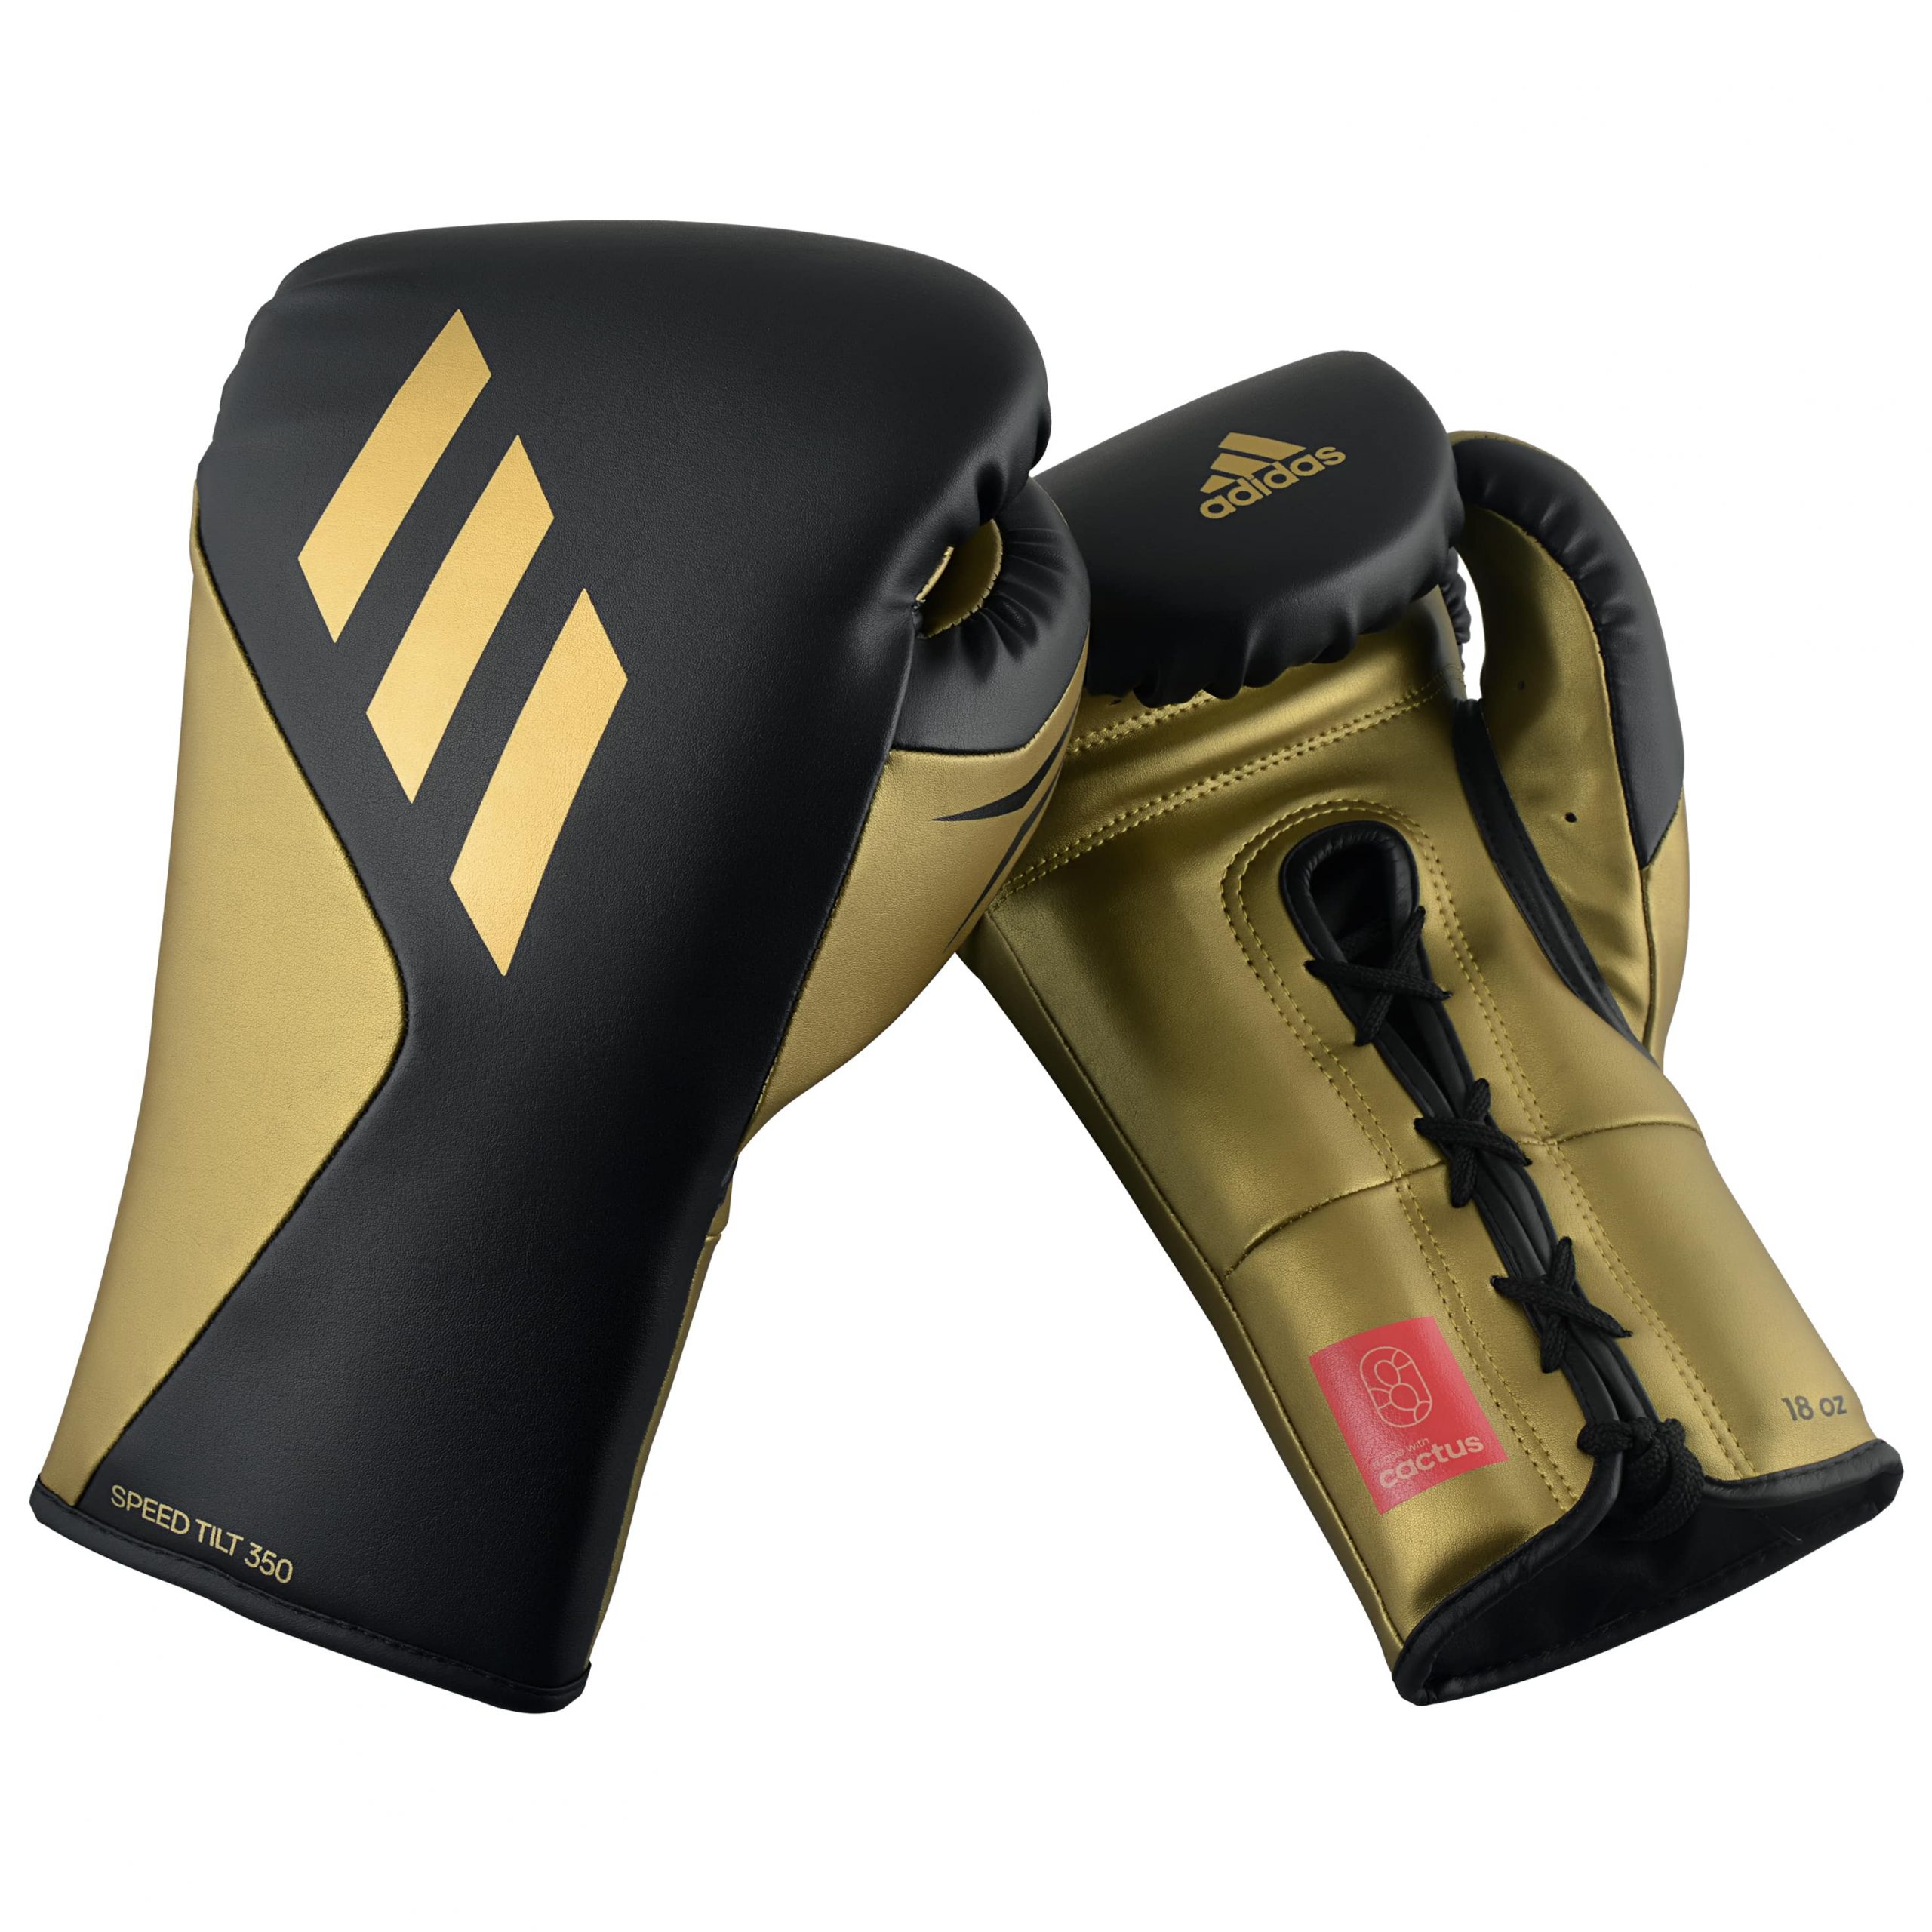 Tilt 350 PRO Training Gloves – Lace-up    [PRE-ORDERING ONLY]